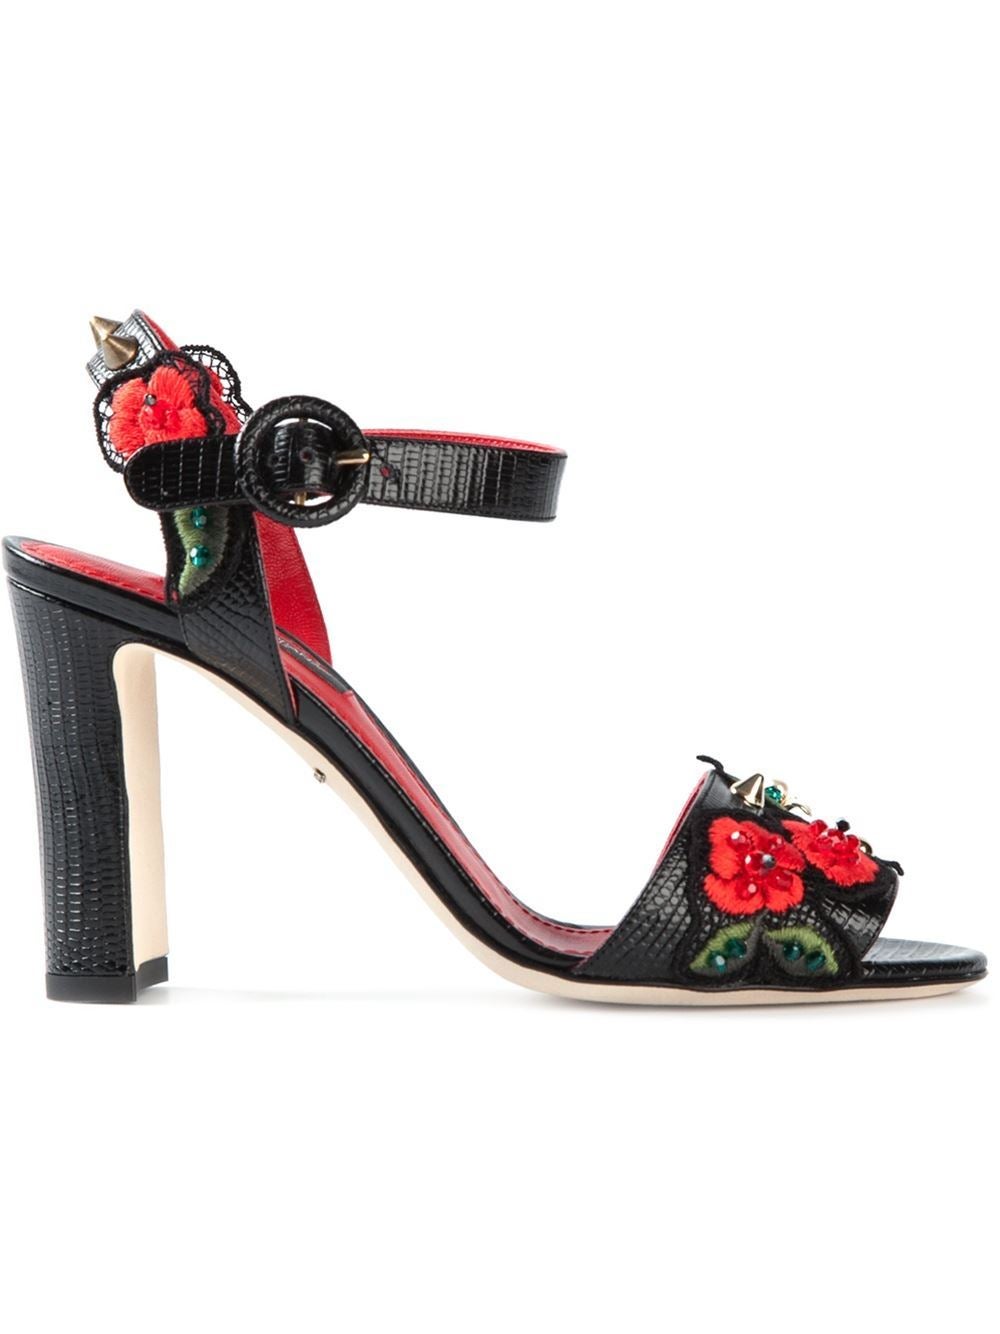 Dolce and Gabbana New Runway Carnation Heeled Sandals, 37.5 IT at 1stDibs